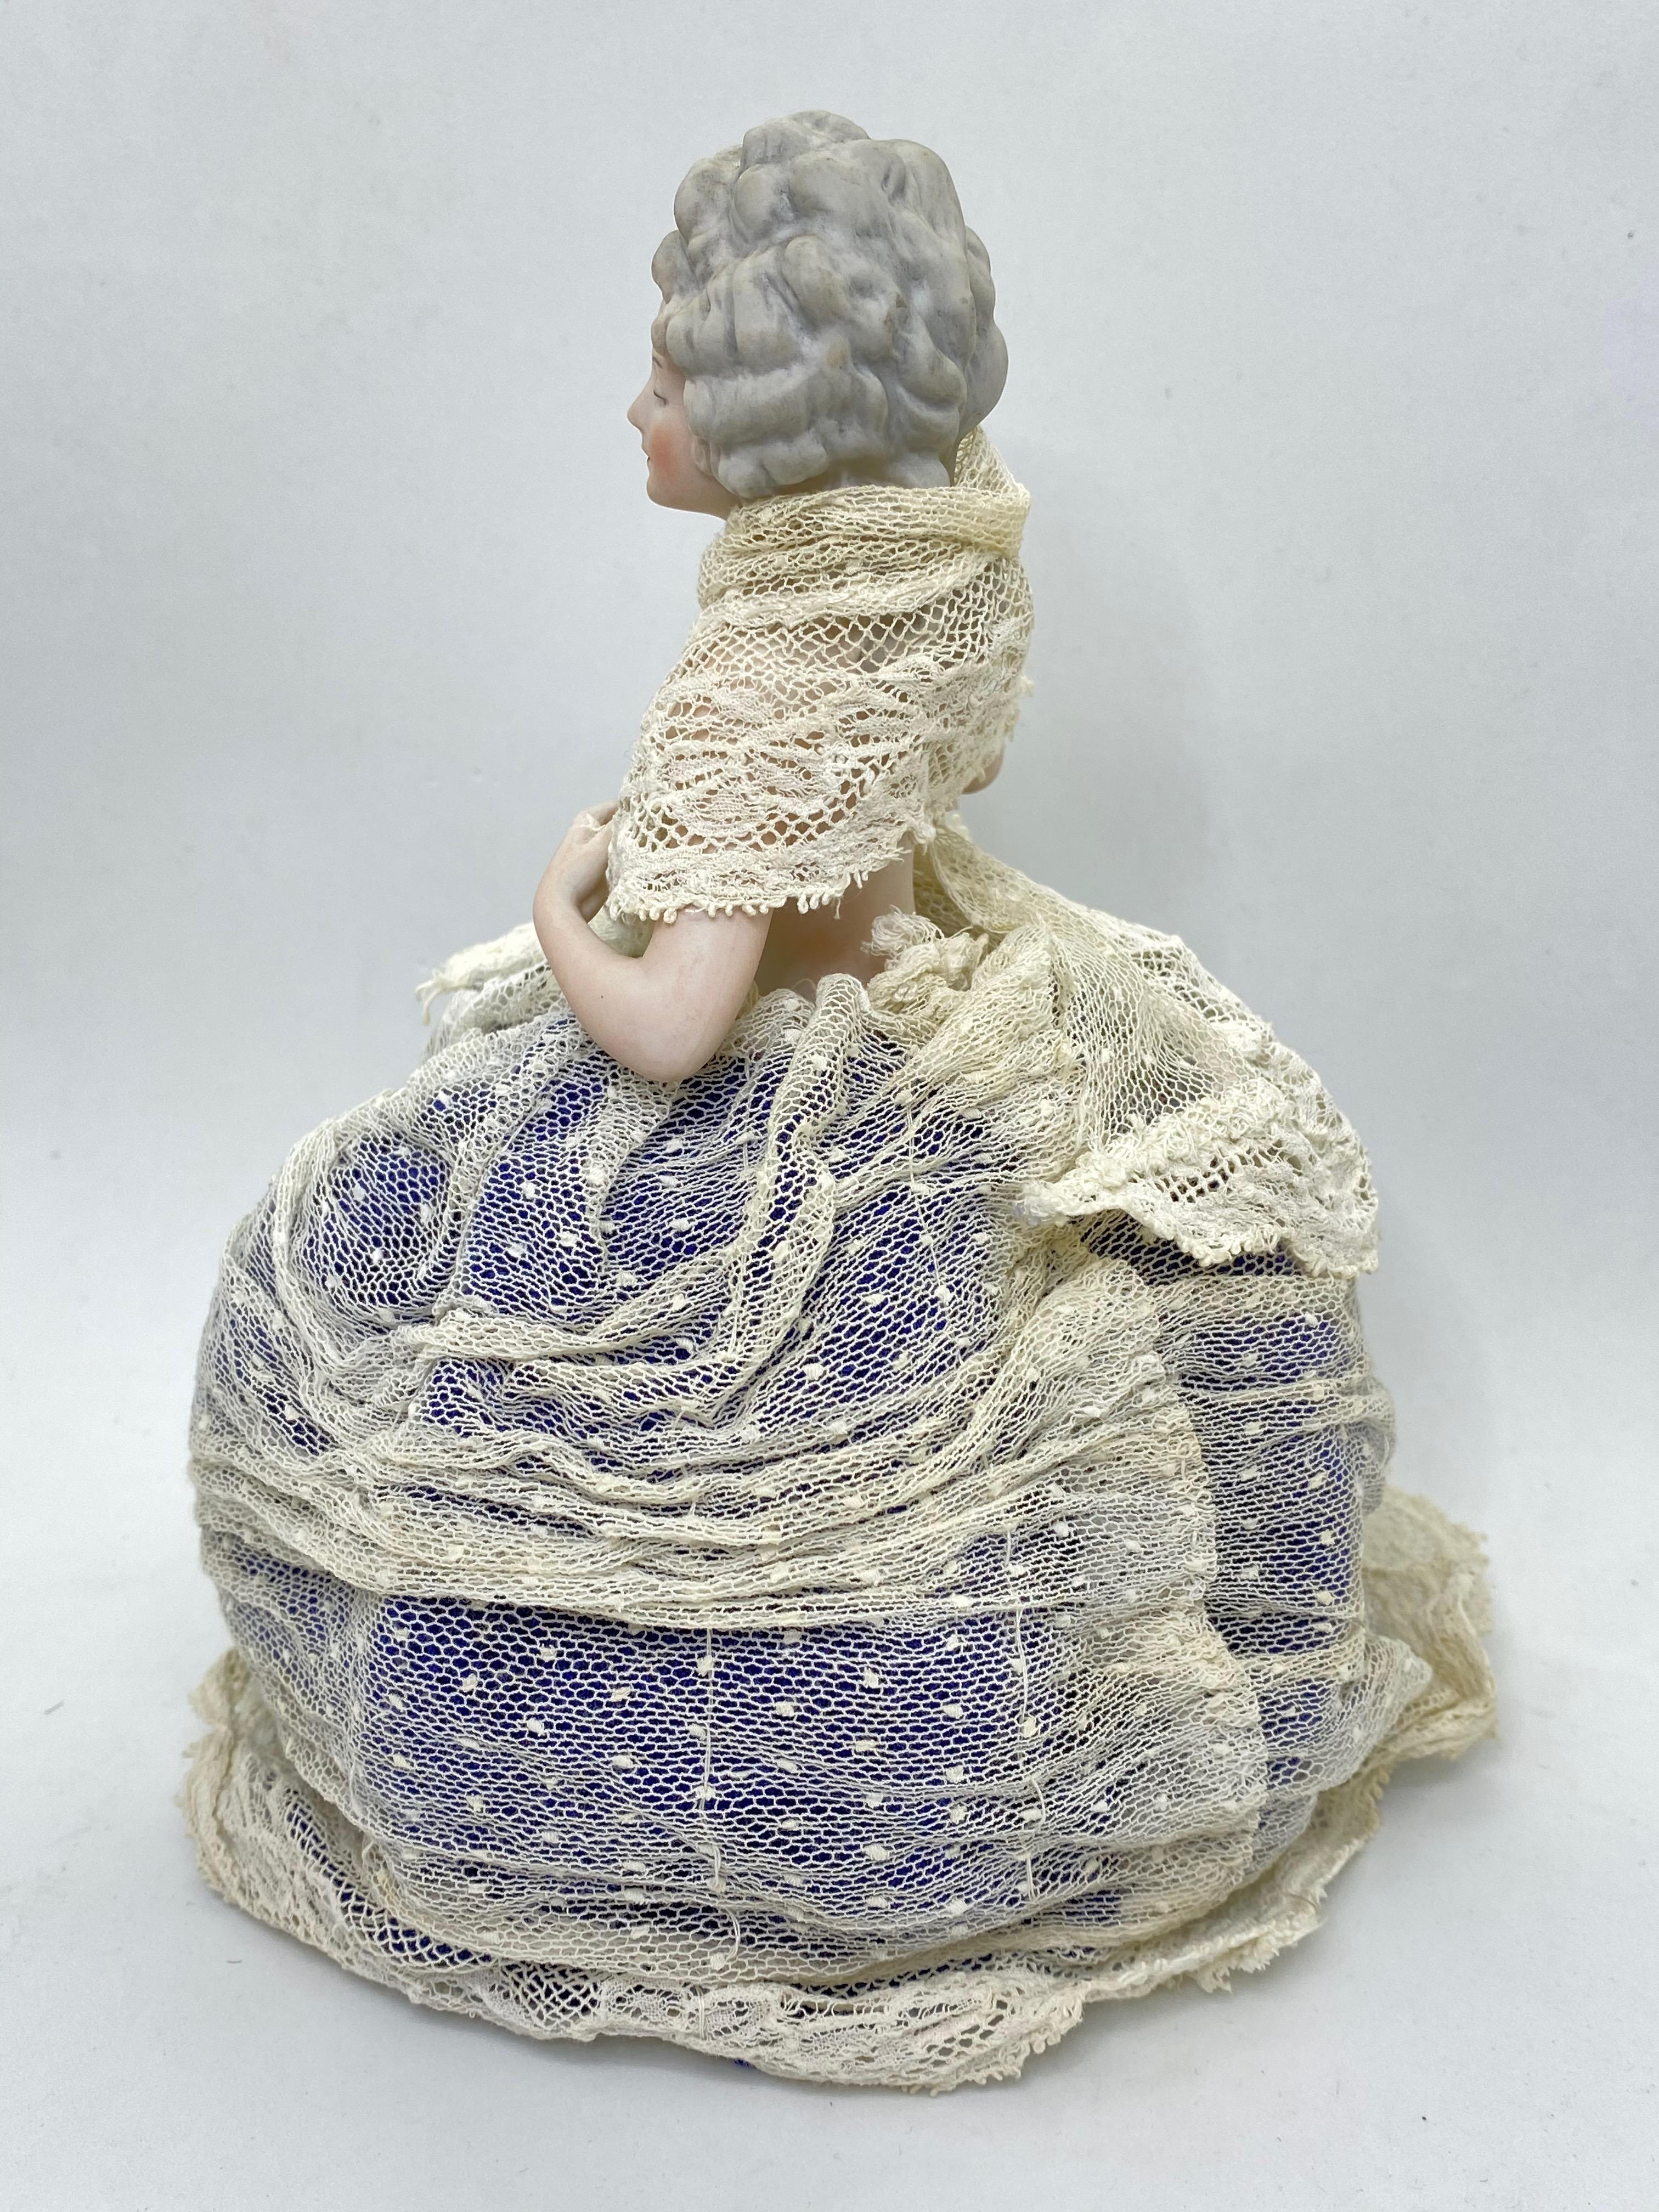 Hollywood Regency German Bisque Porcelain Half Doll with Original Wire Lace Skirt Antique, 1910s For Sale